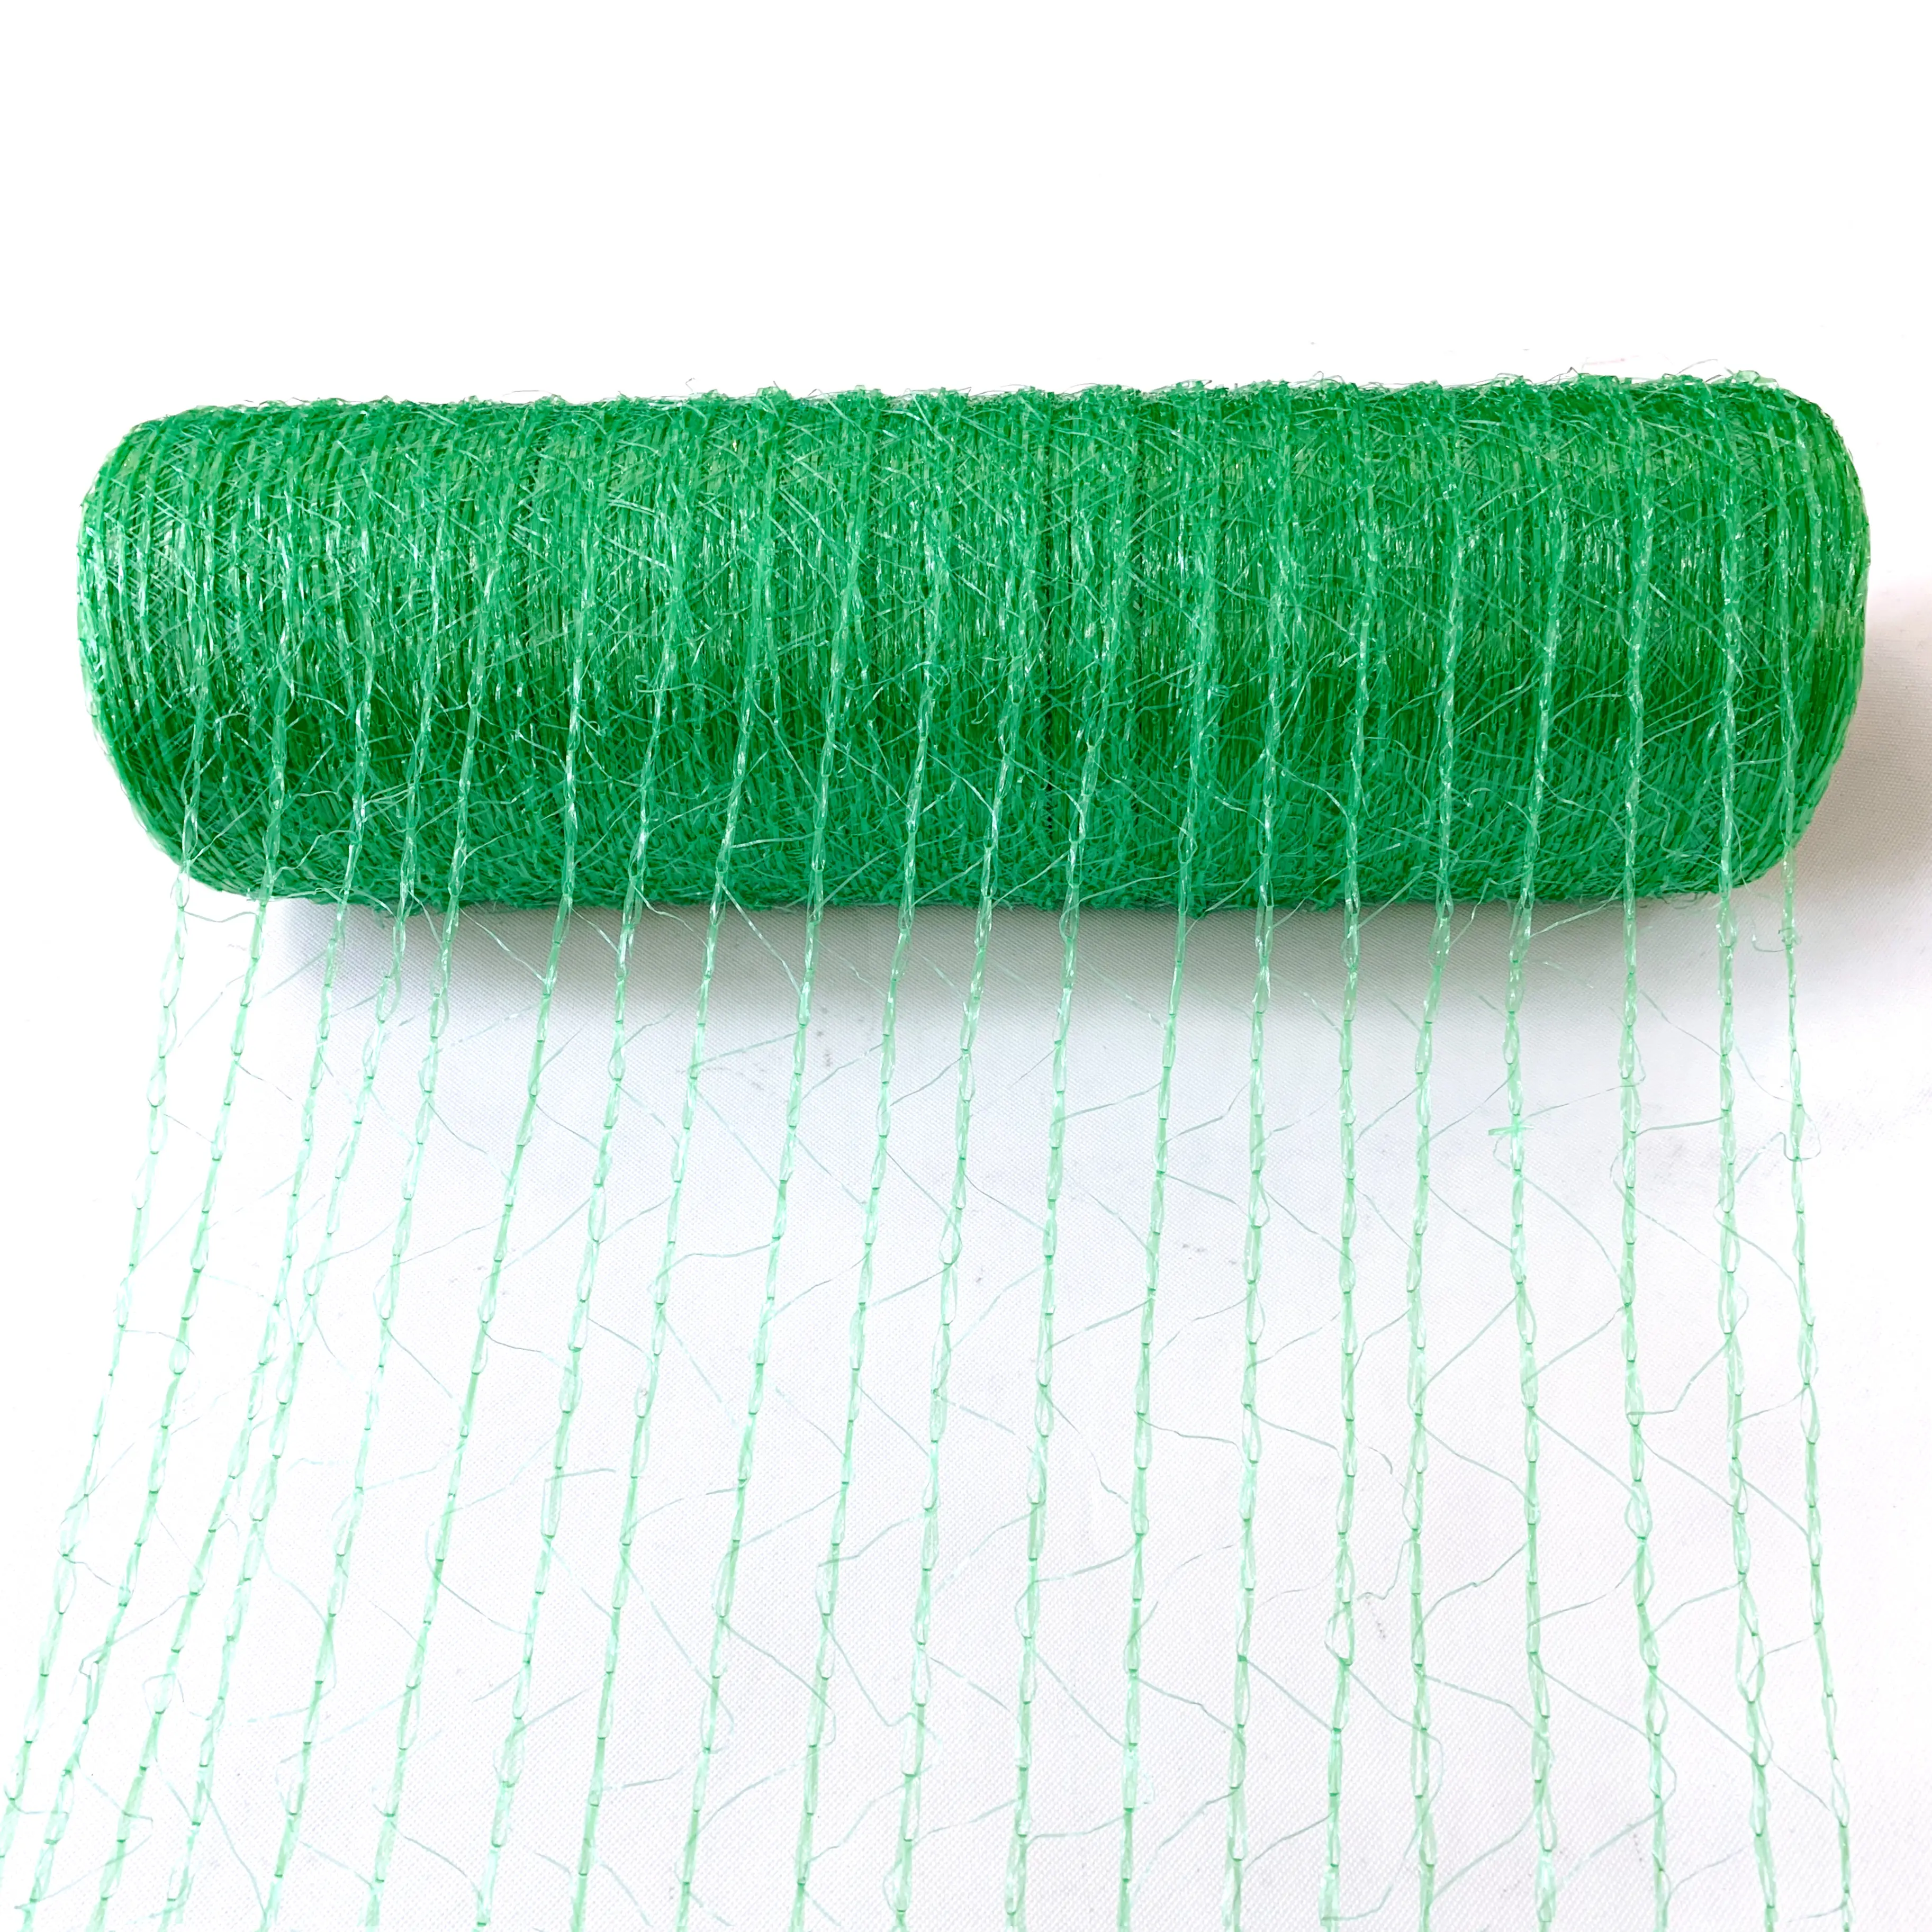 agriculture bale net wrap round hay net greenhouse hdpe knitted stretch silage hay baler netting wrap